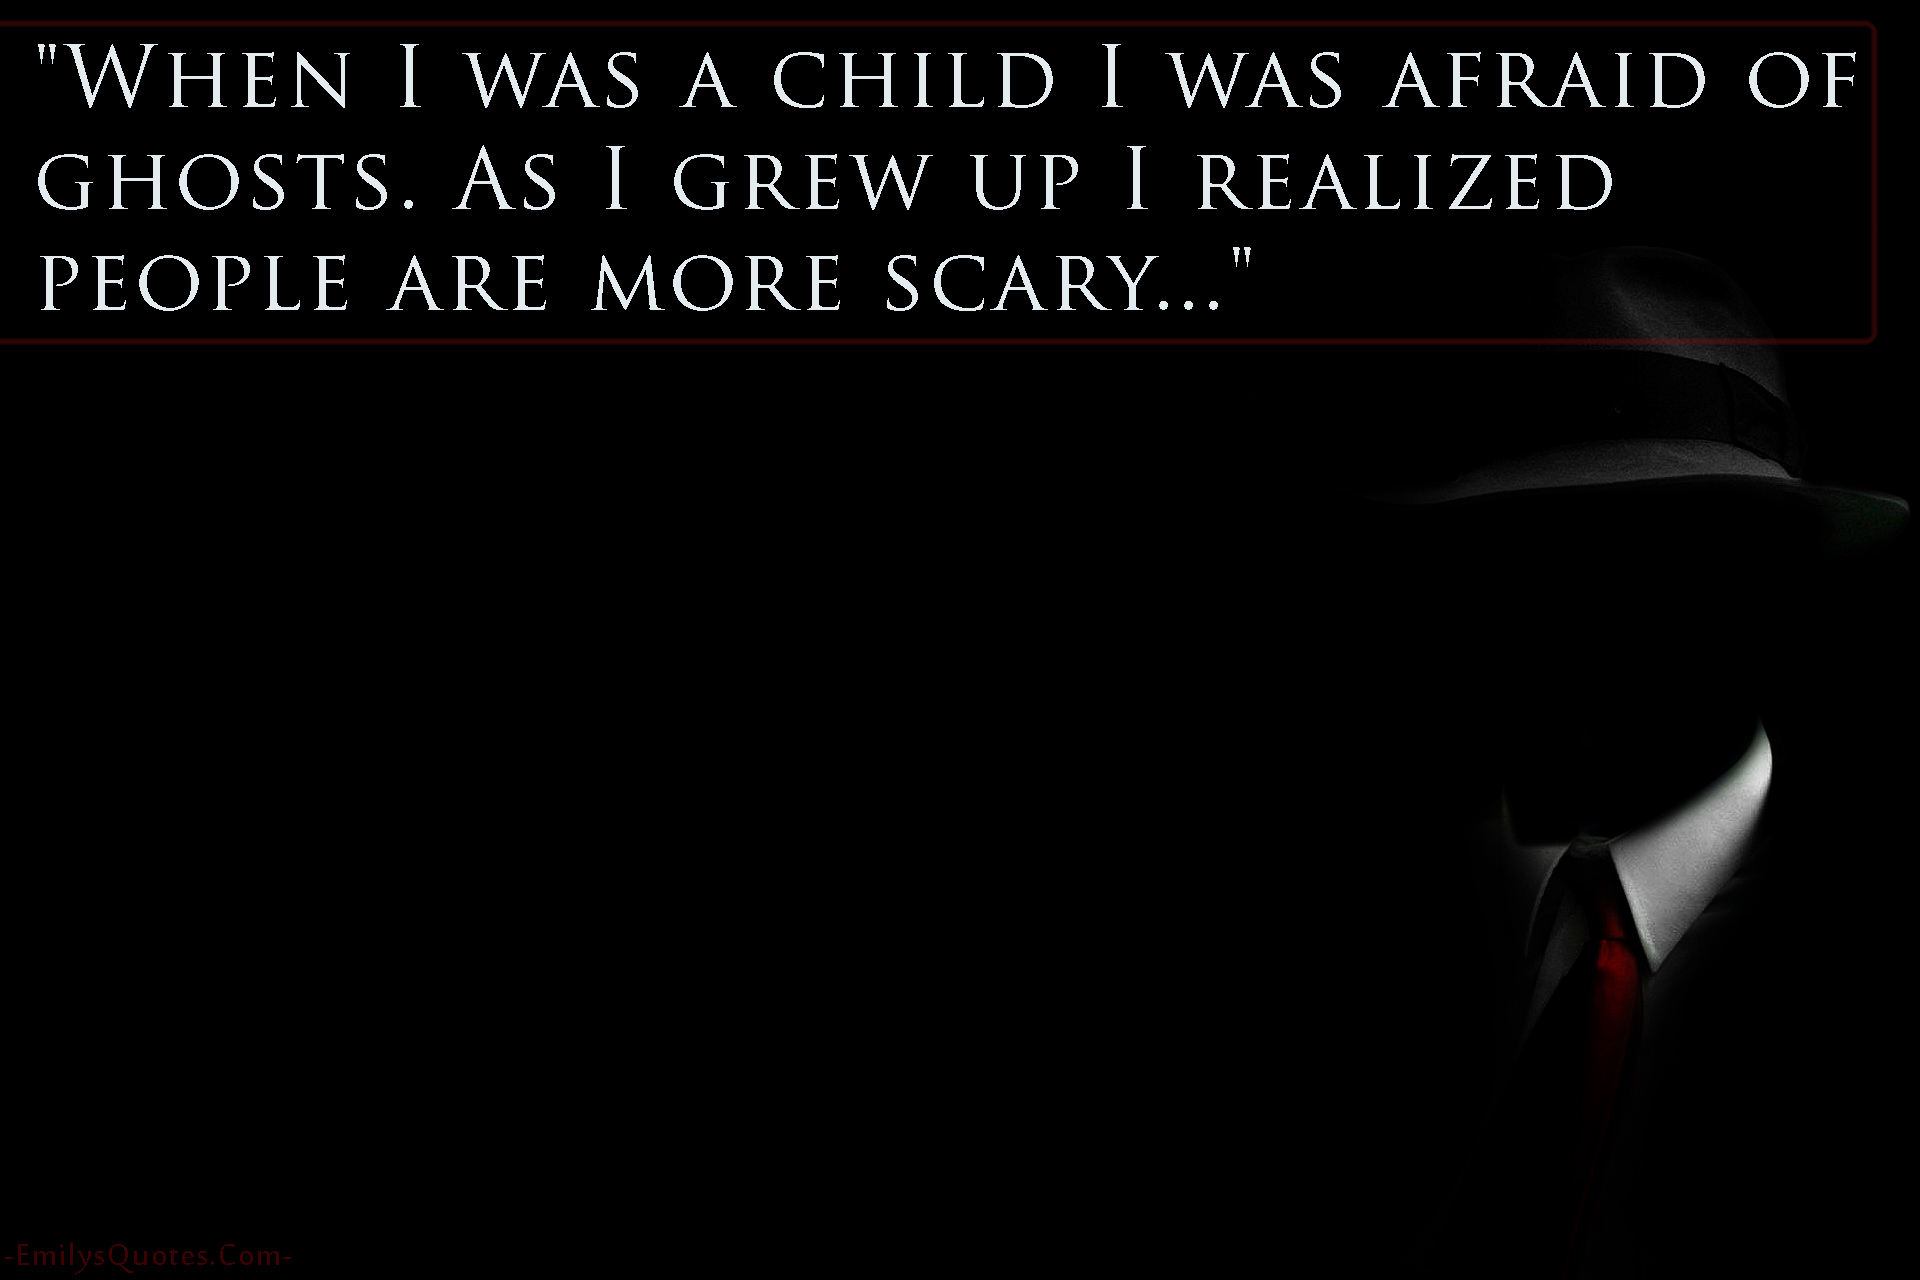 When I was a child I was afraid of ghosts. As I grew up I realized people are more scary